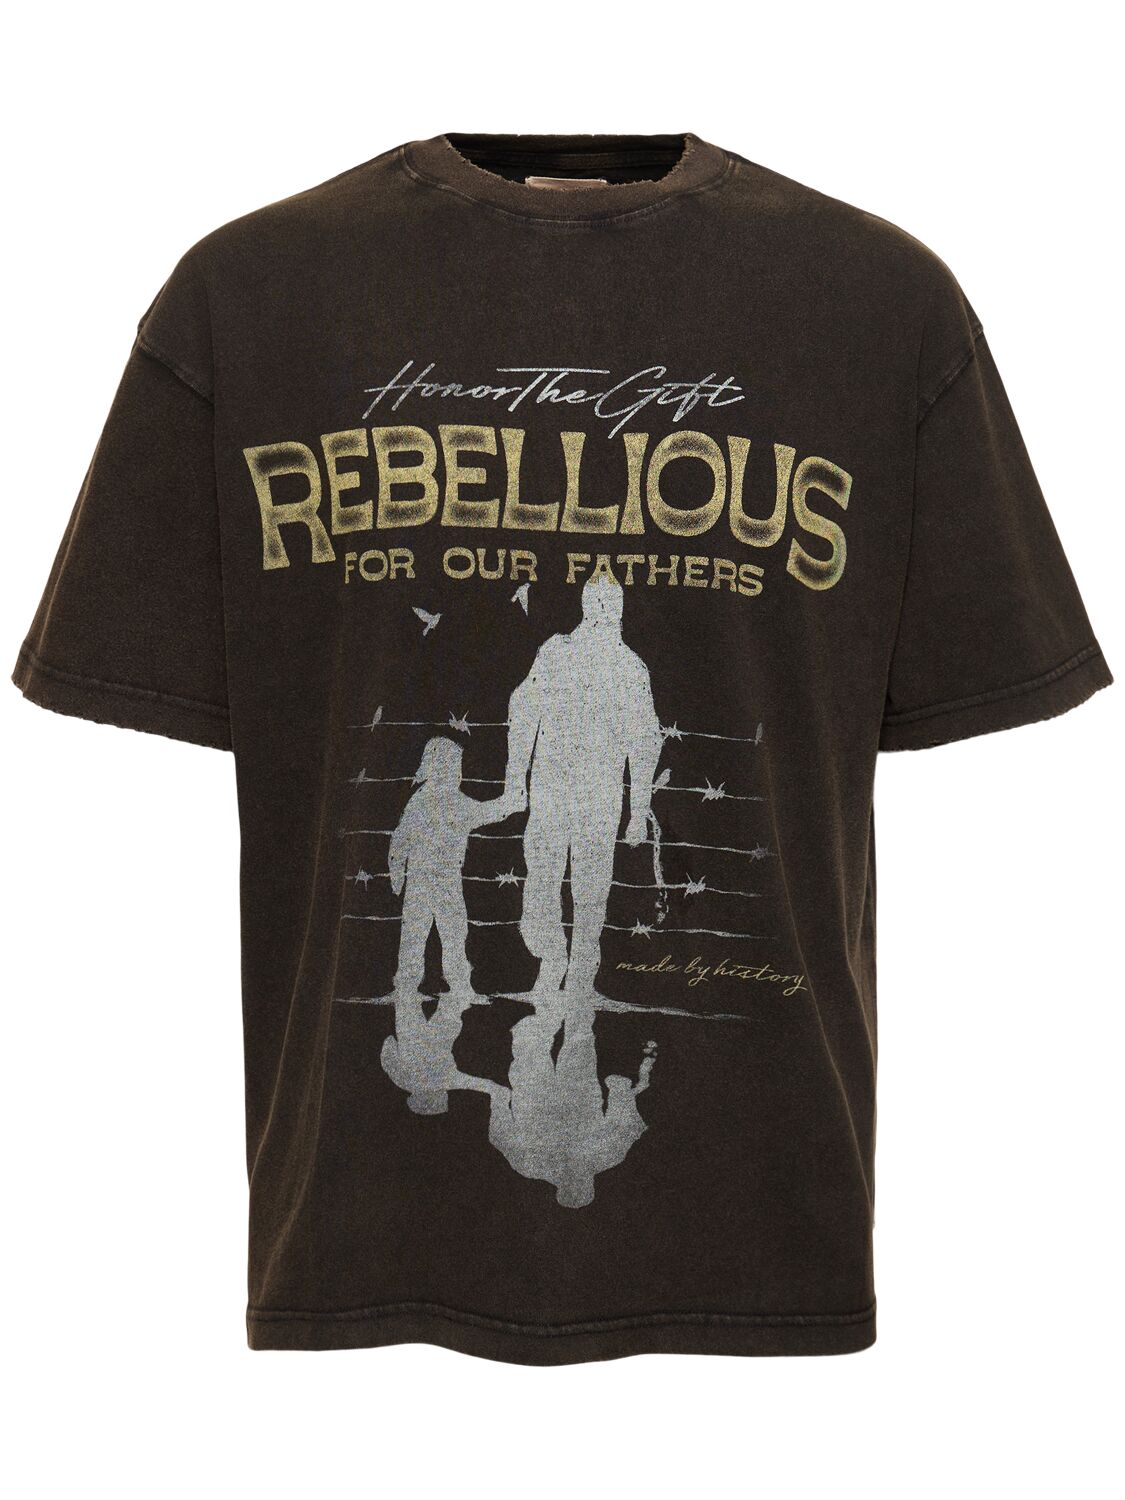 Rebellious For Our Fathers T-shirt